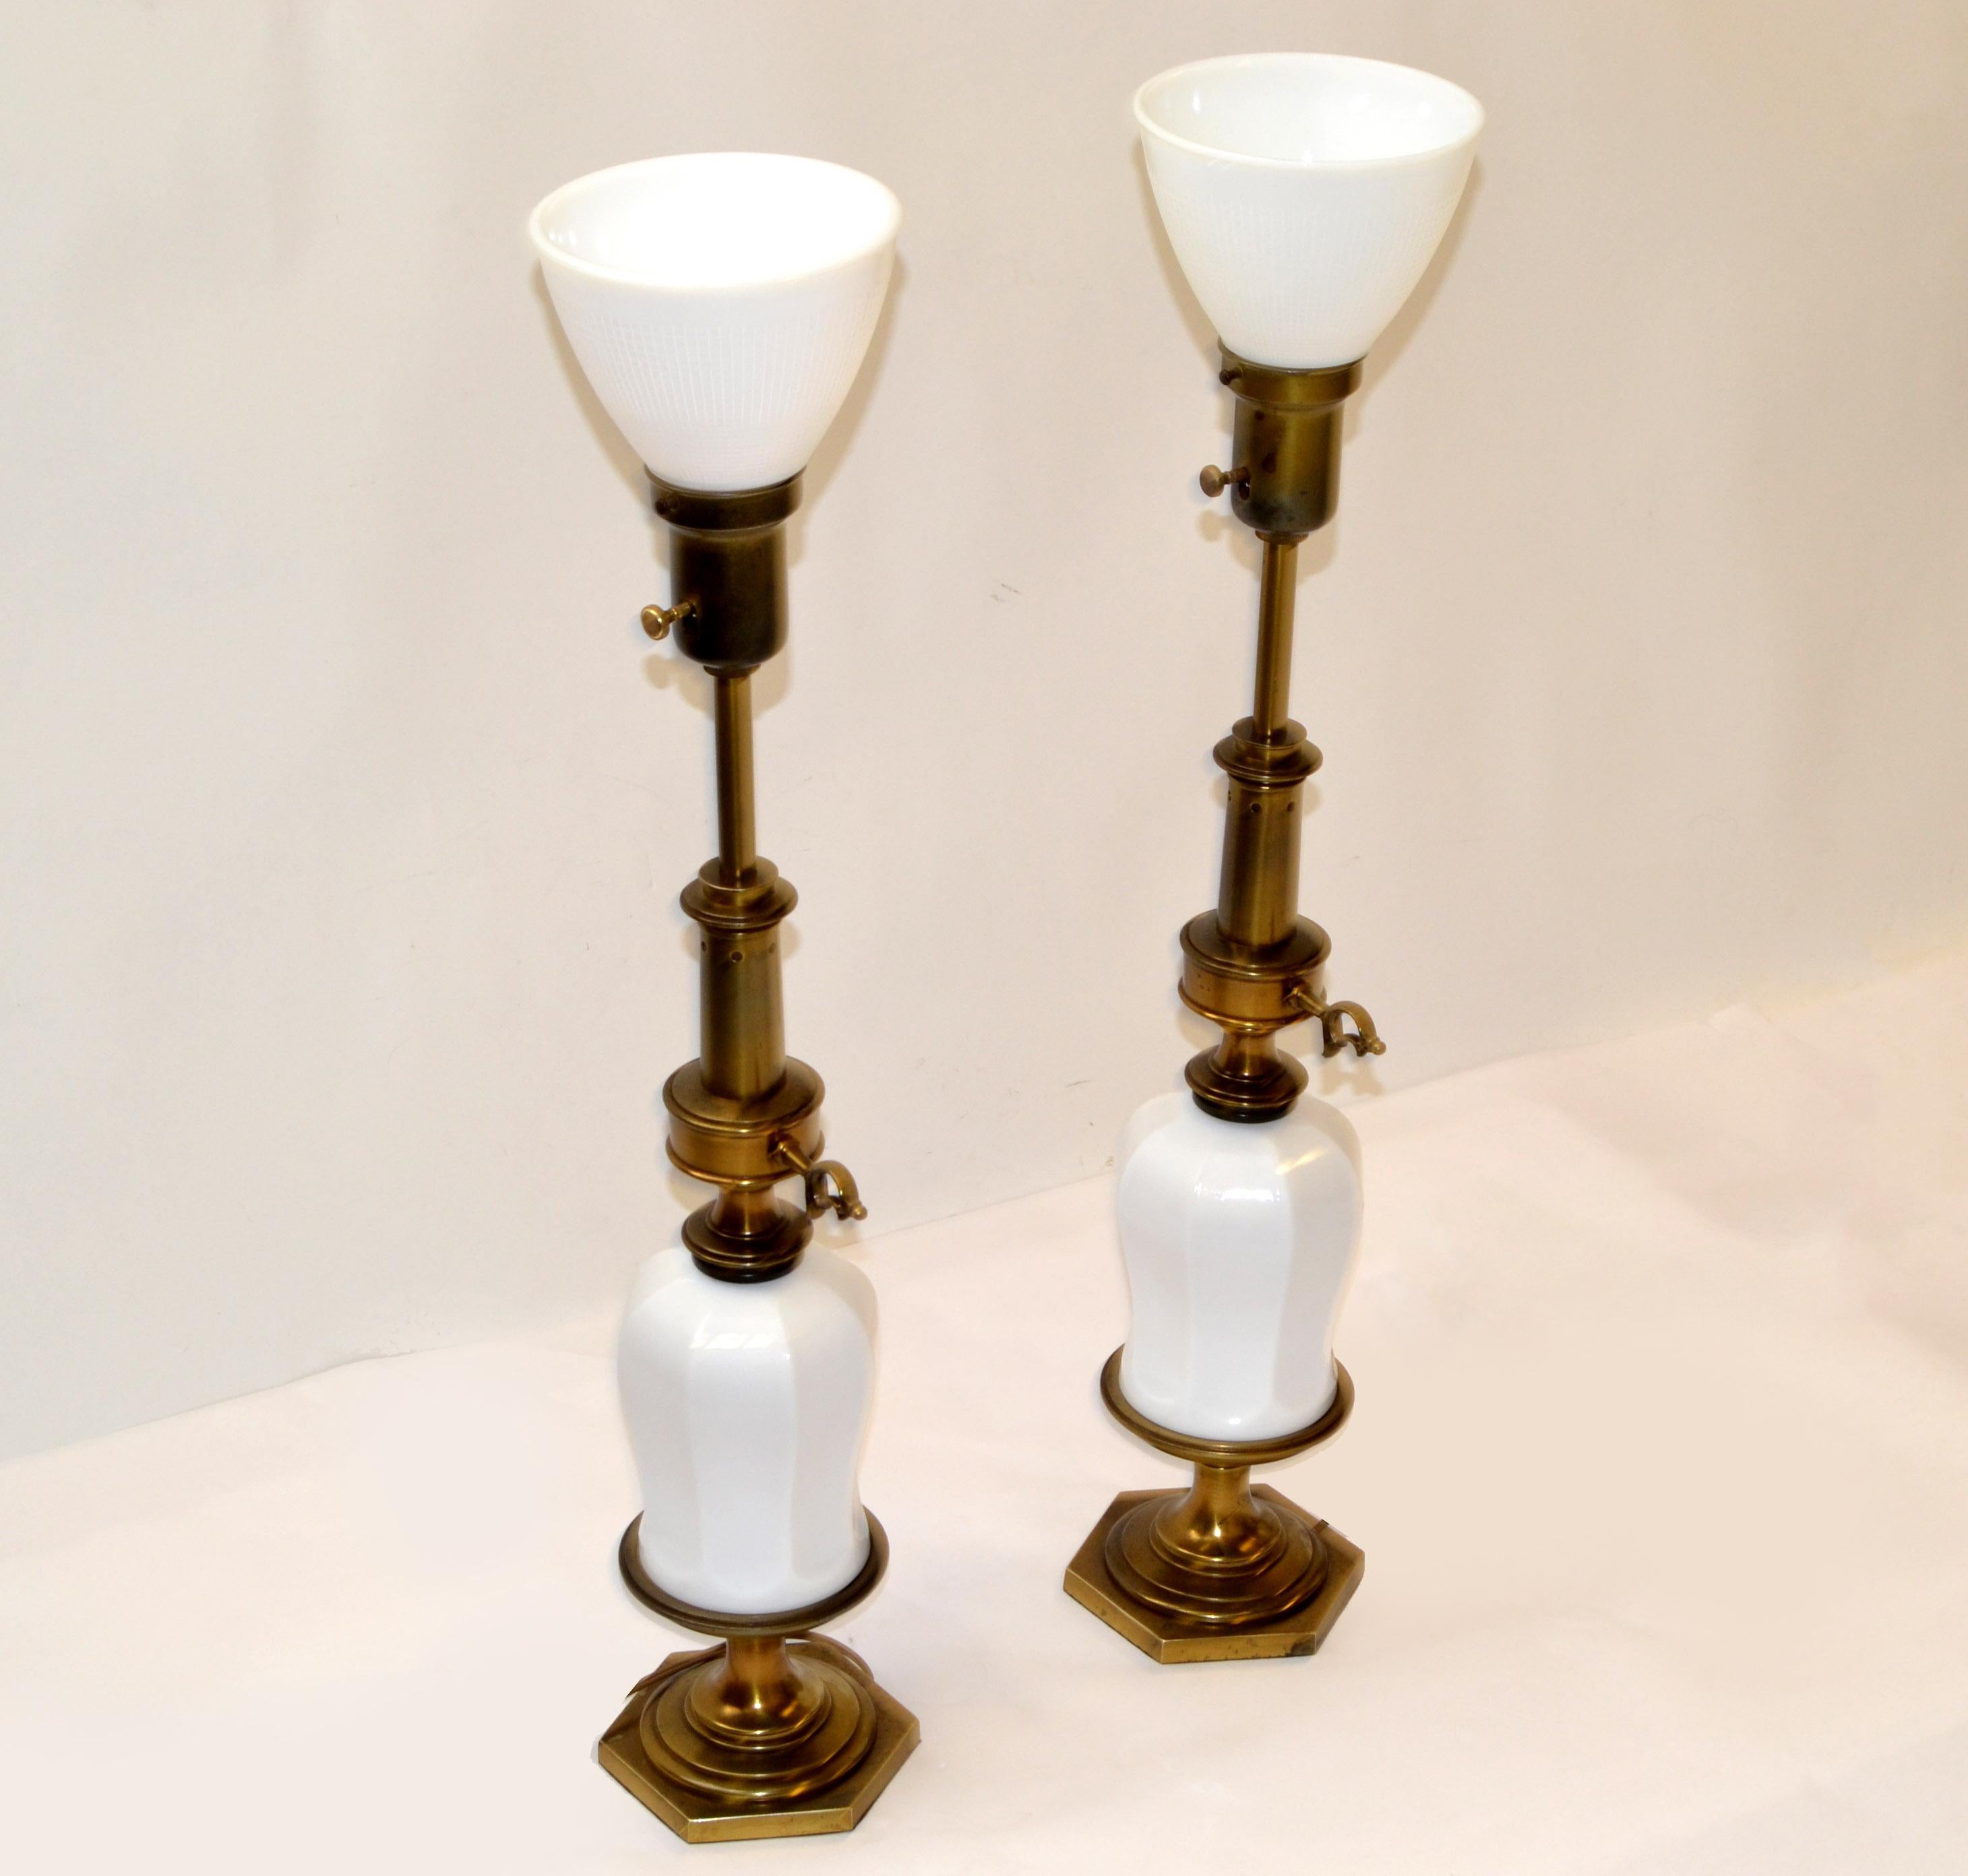 Pair of gorgeous chinoiserie table lamps attributed to Stiffel porcelain vase form body and featuring a classic brass torchiere and pedestal. Original long brass torchiere style stem with a milk glass diffuser. 
The shaped porcelain bodies are free